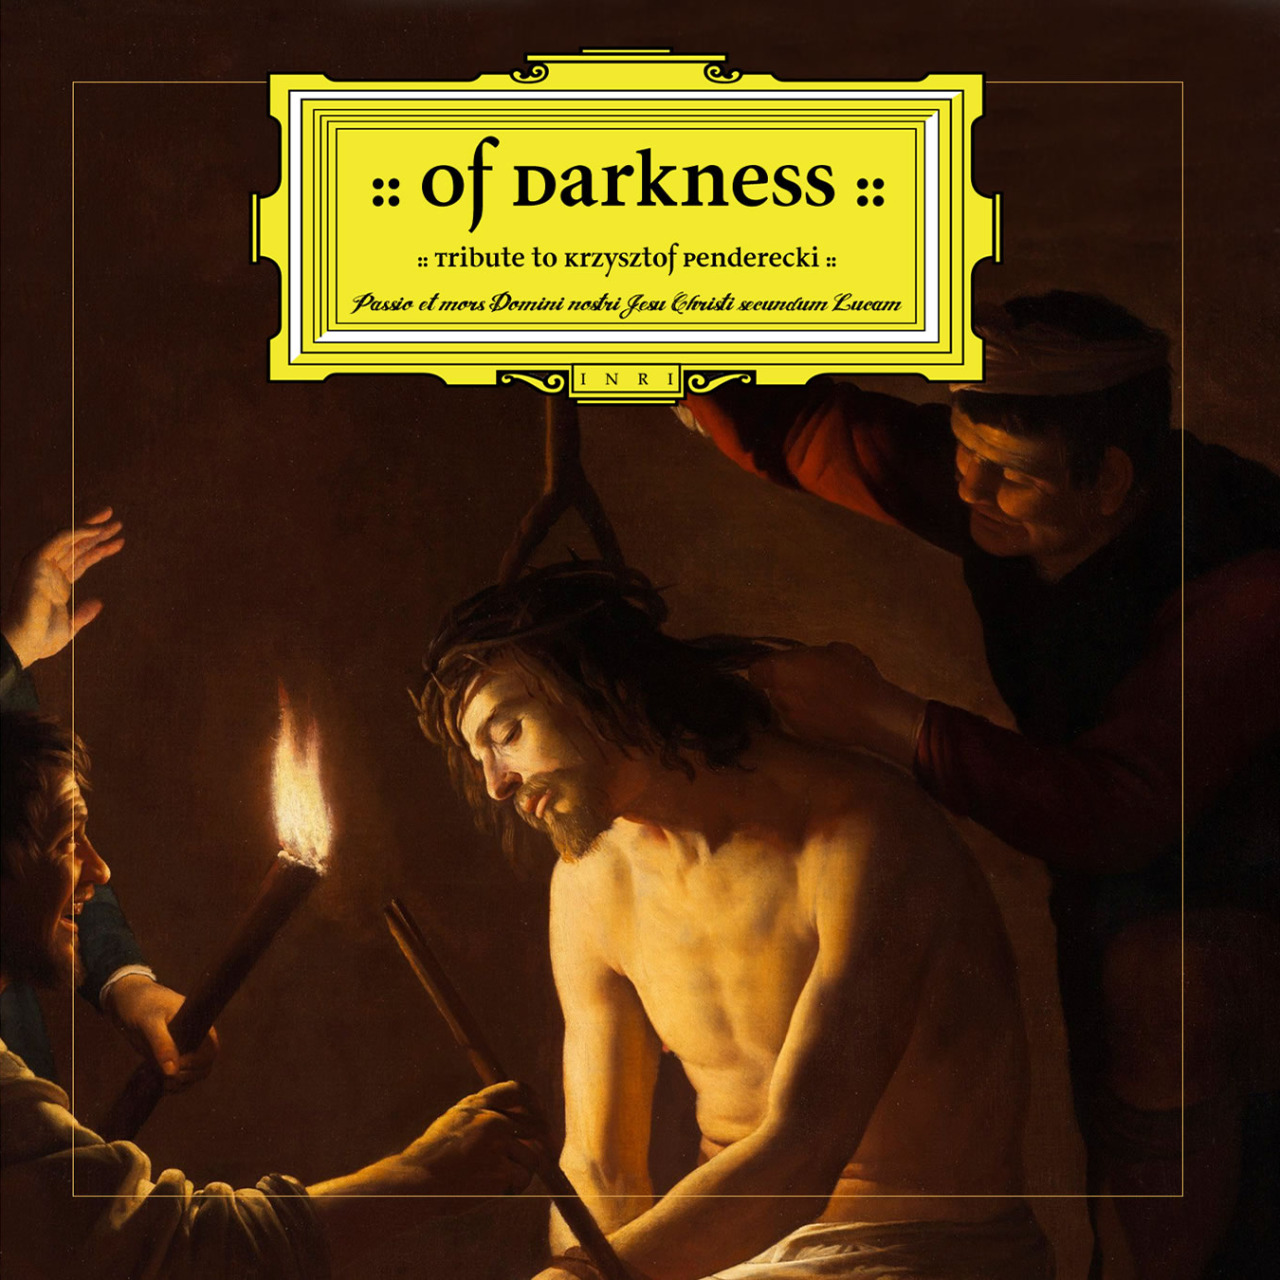 Of Darkness - Tribute to Krzysztof Penderecki - Passio et mors Domini nostri Jesu Christi secundum Lucam
Label: GH Records - GH125 CD
Format: CD, Album
Country: Spain
Released: 01 Jan 2015
Style: Funeral Death Music
The new work Of Darkness continues...